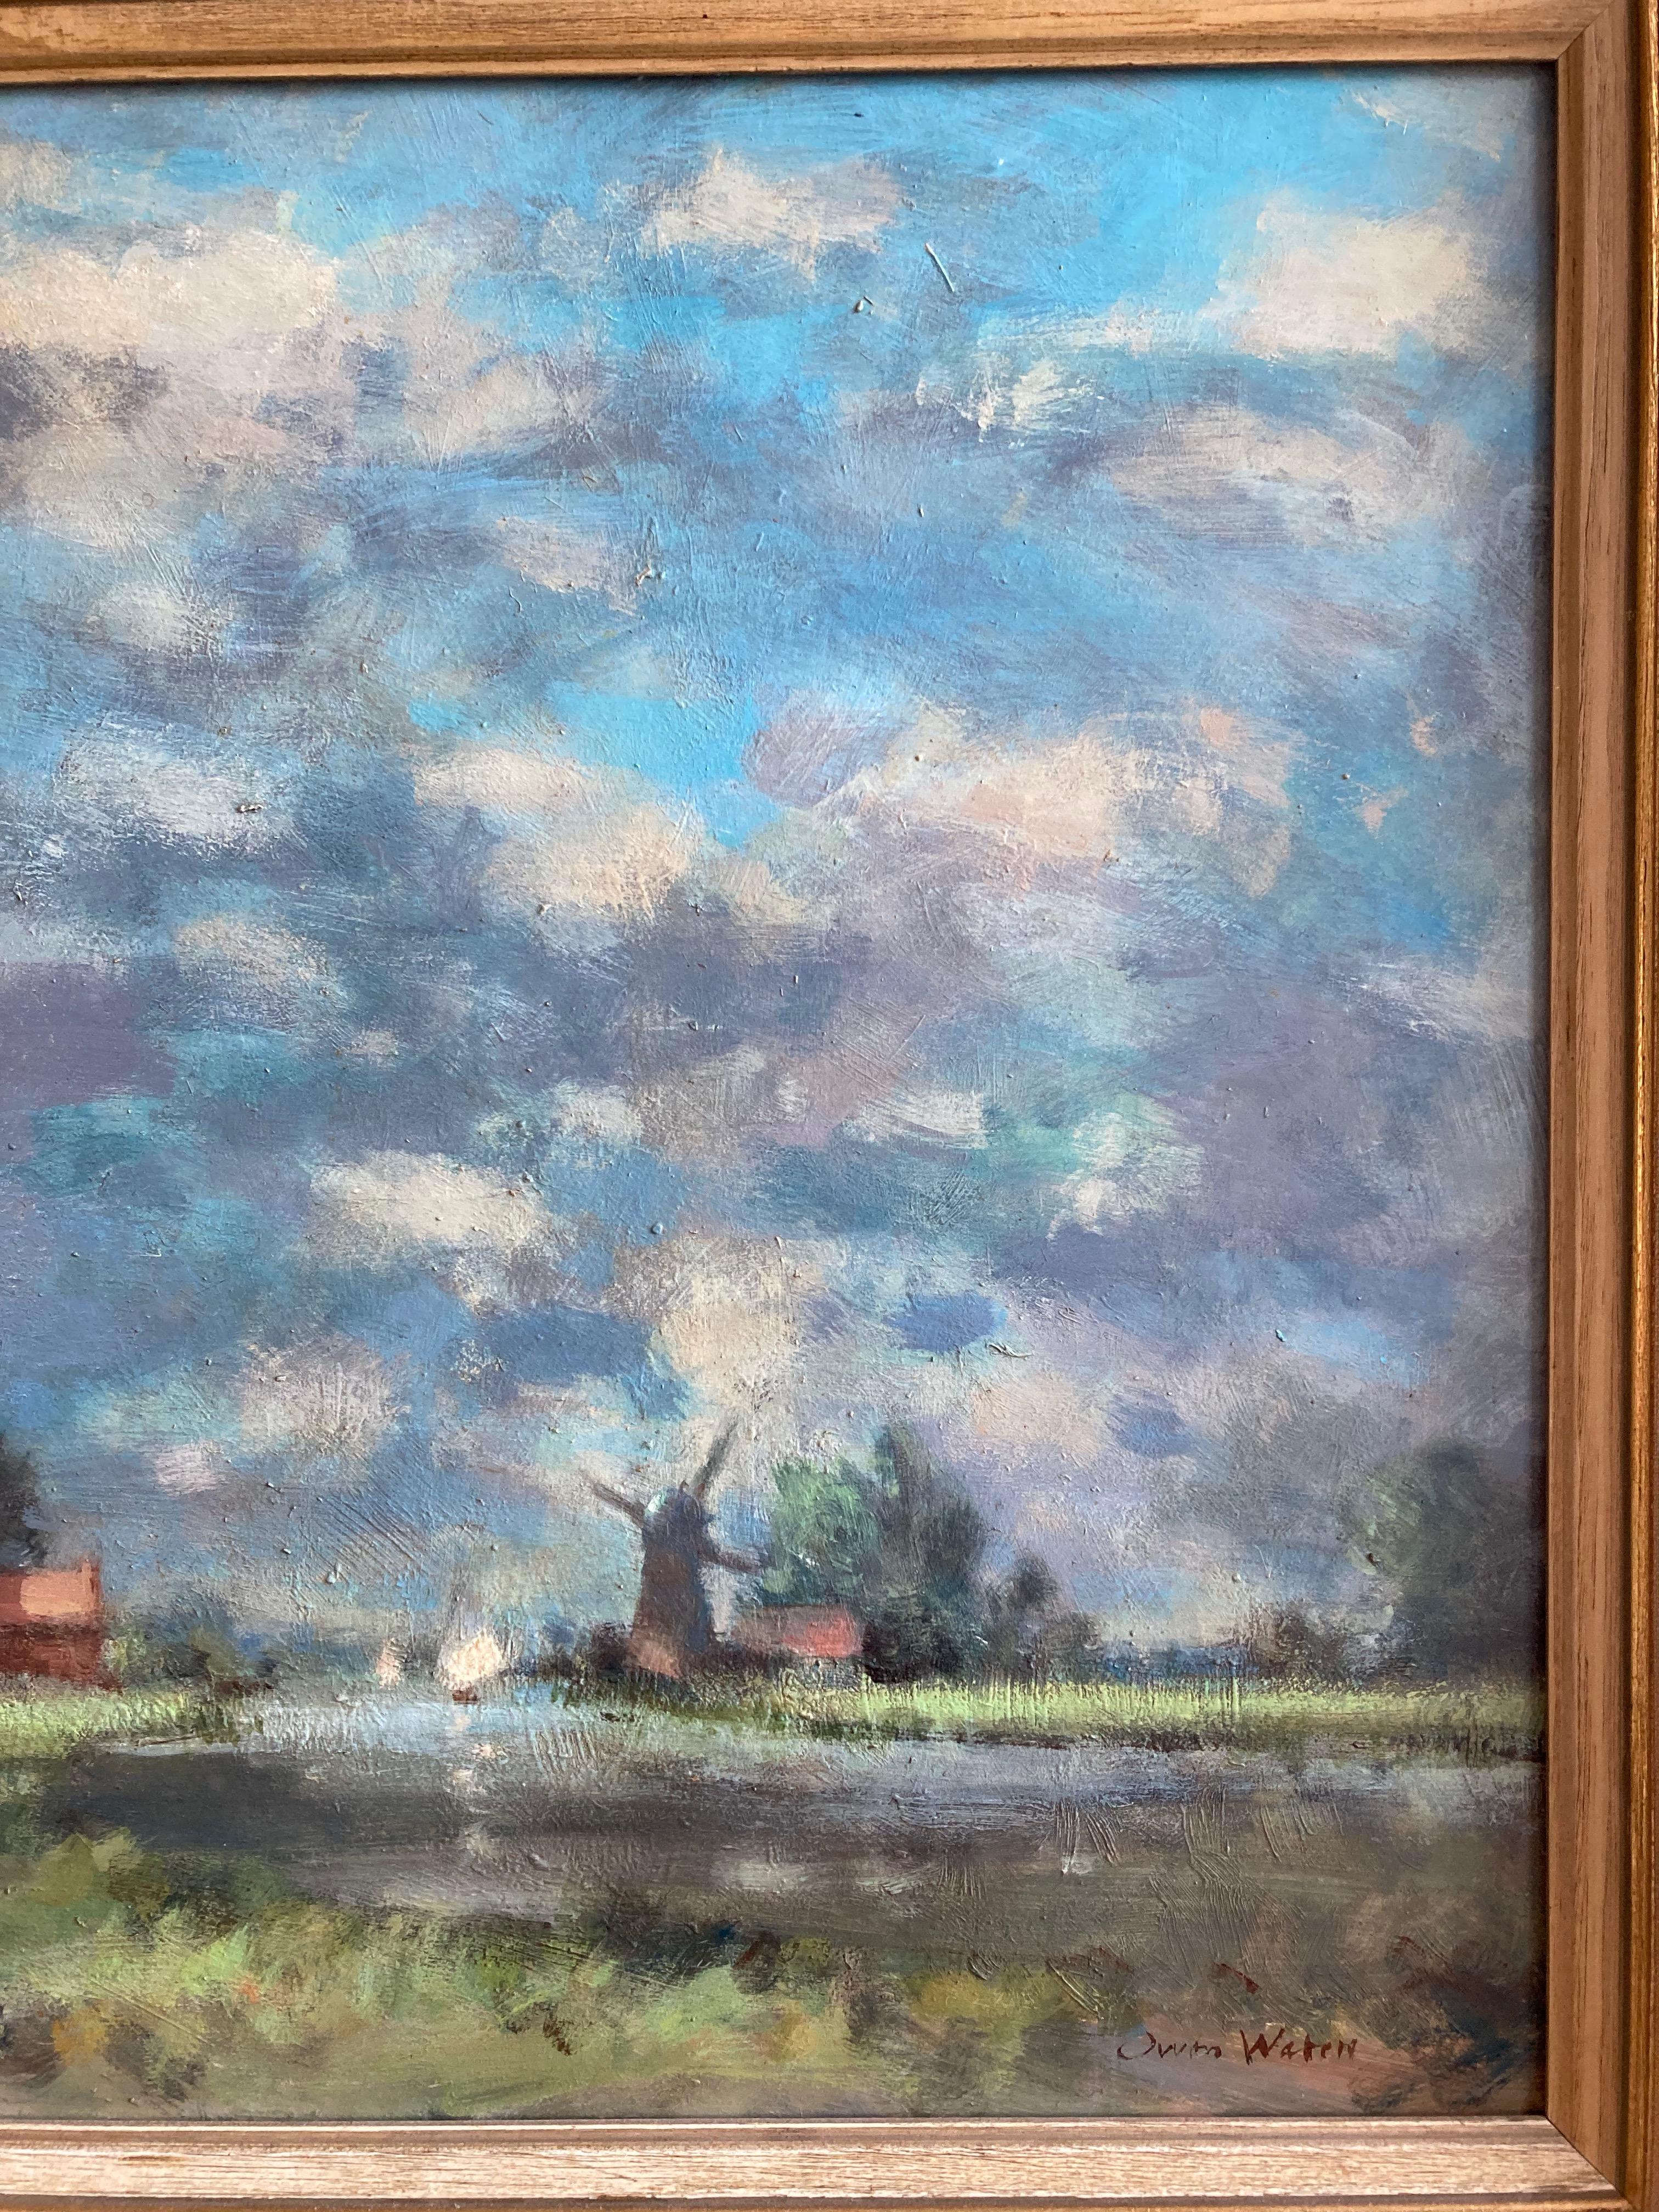 A wonderful example of the artist's work on an unusually large scale, showing the clear influence of Edward Seago, particularly to the billowing Norfolk sky.

Owen Waters (1916-2004)
Approaching storm
Signed
Oil on board
16 x 23¾ inches
(19½  x 27½